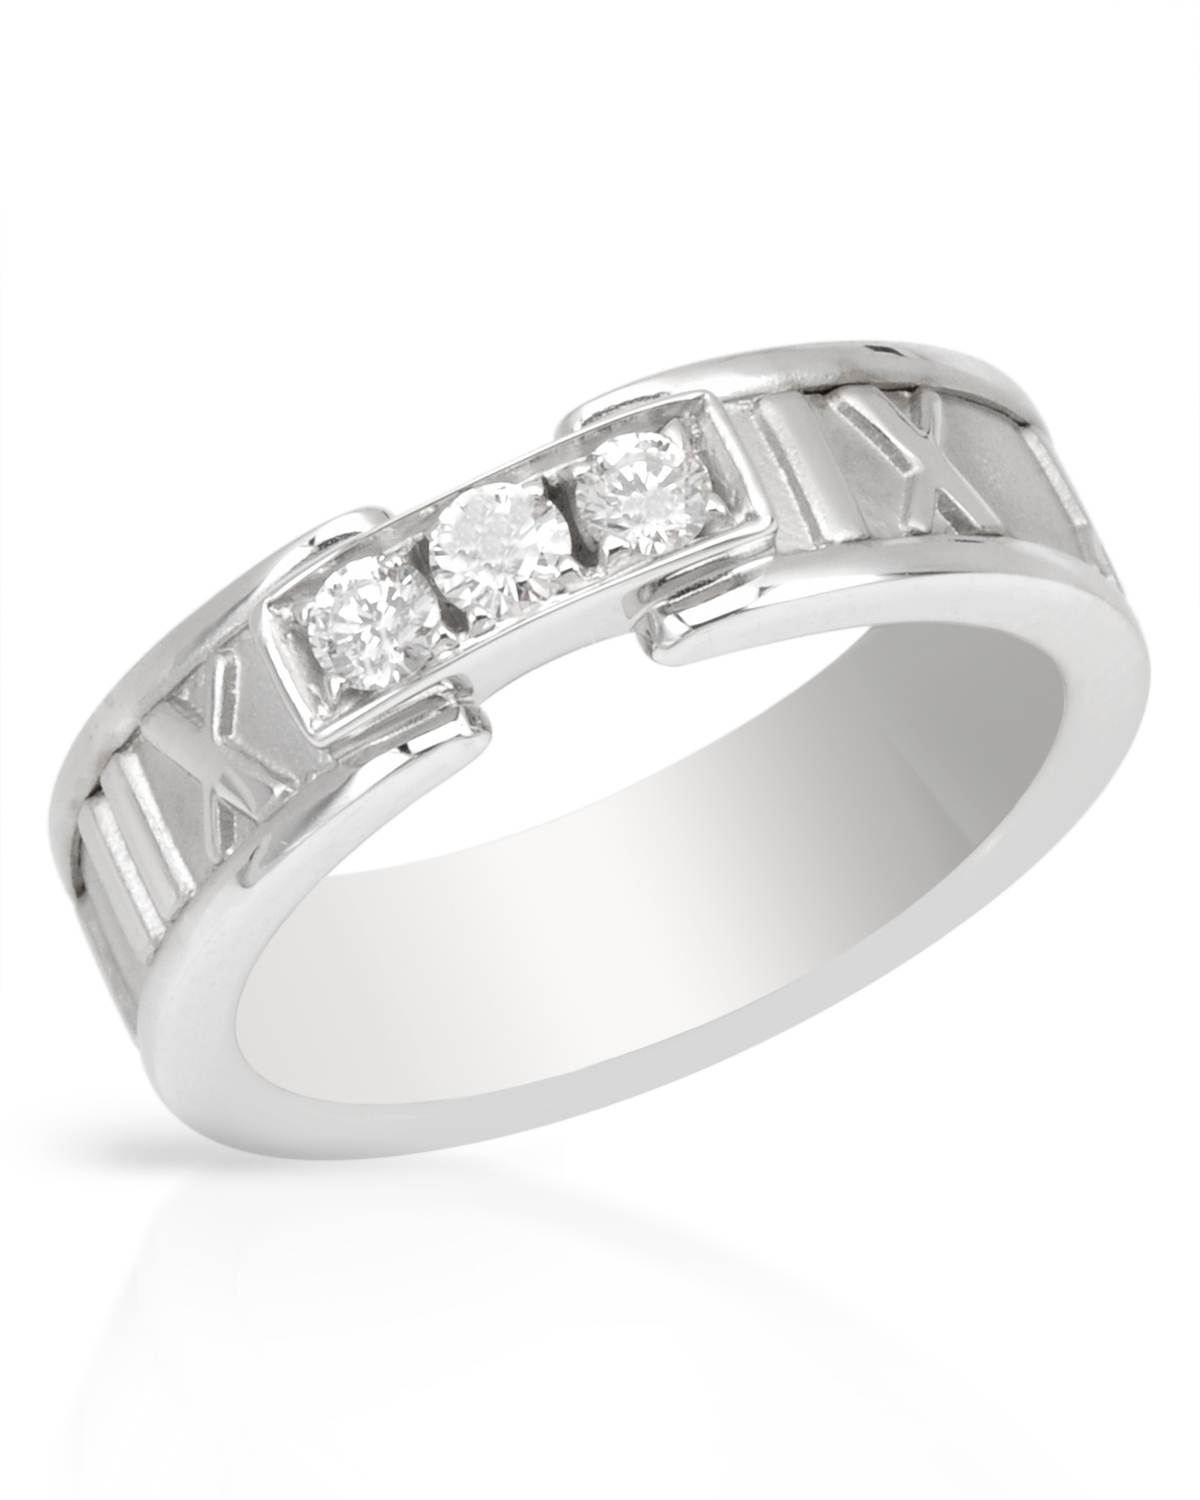 TIFFANY-CO-Atlas-Ring-with-0-25ctw-Diamonds-Made-Of-18K-White-Gold-Total__016166.jpg